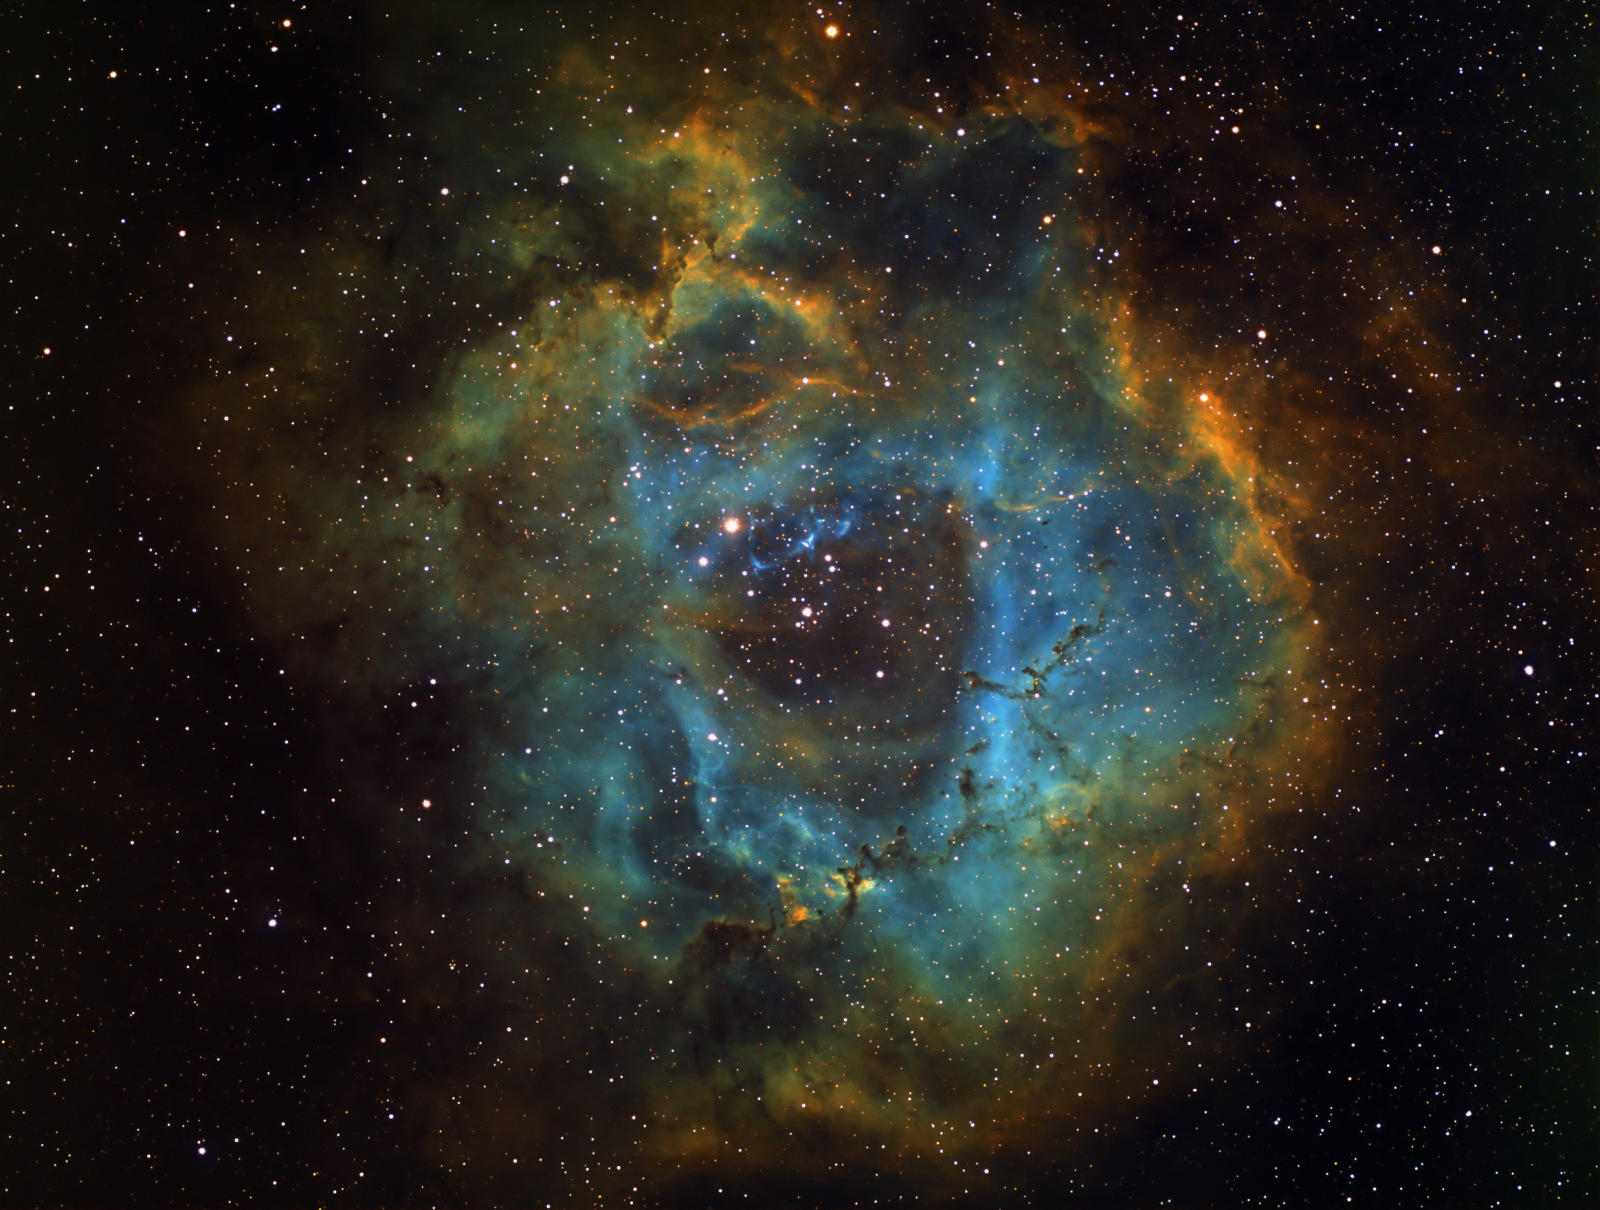 NGC_2239_SHO_SR_small.thumb.png.0343c33d0feb3cf563877aa73d98ea4e.png